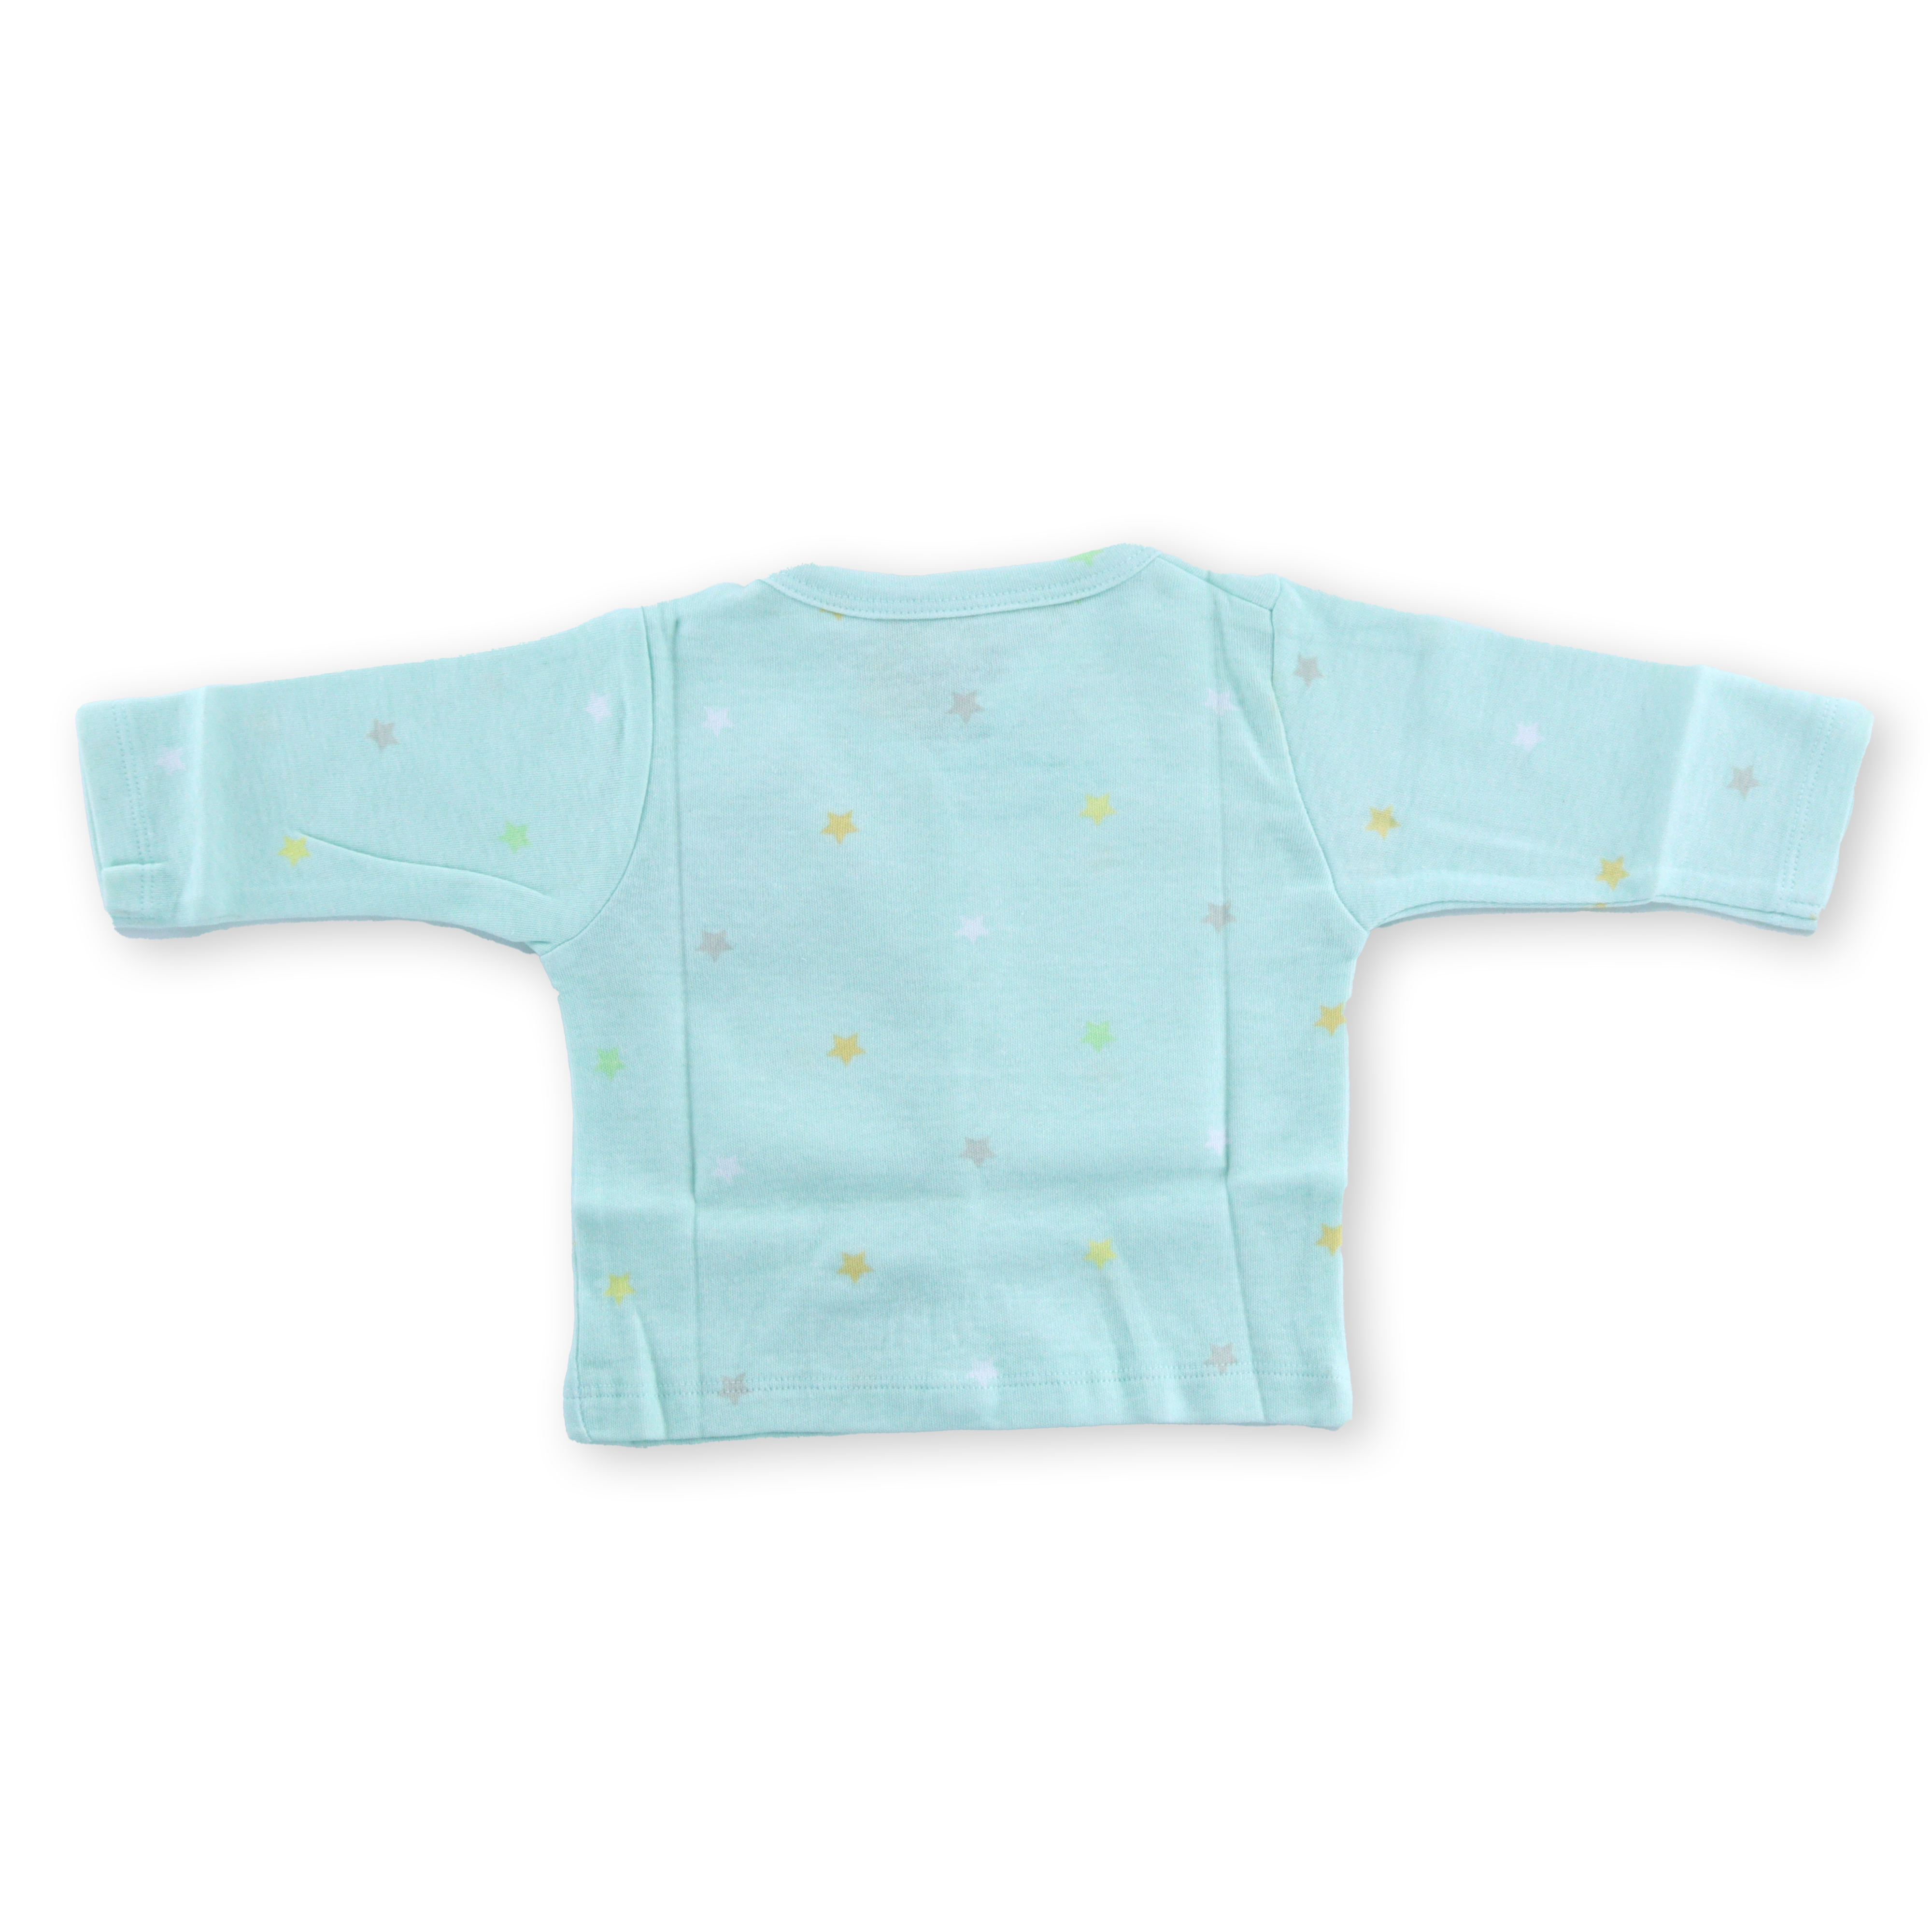 Infants Baby boys clothing sets | Cotton T-shirt with pant| Everyday wear soft cotton